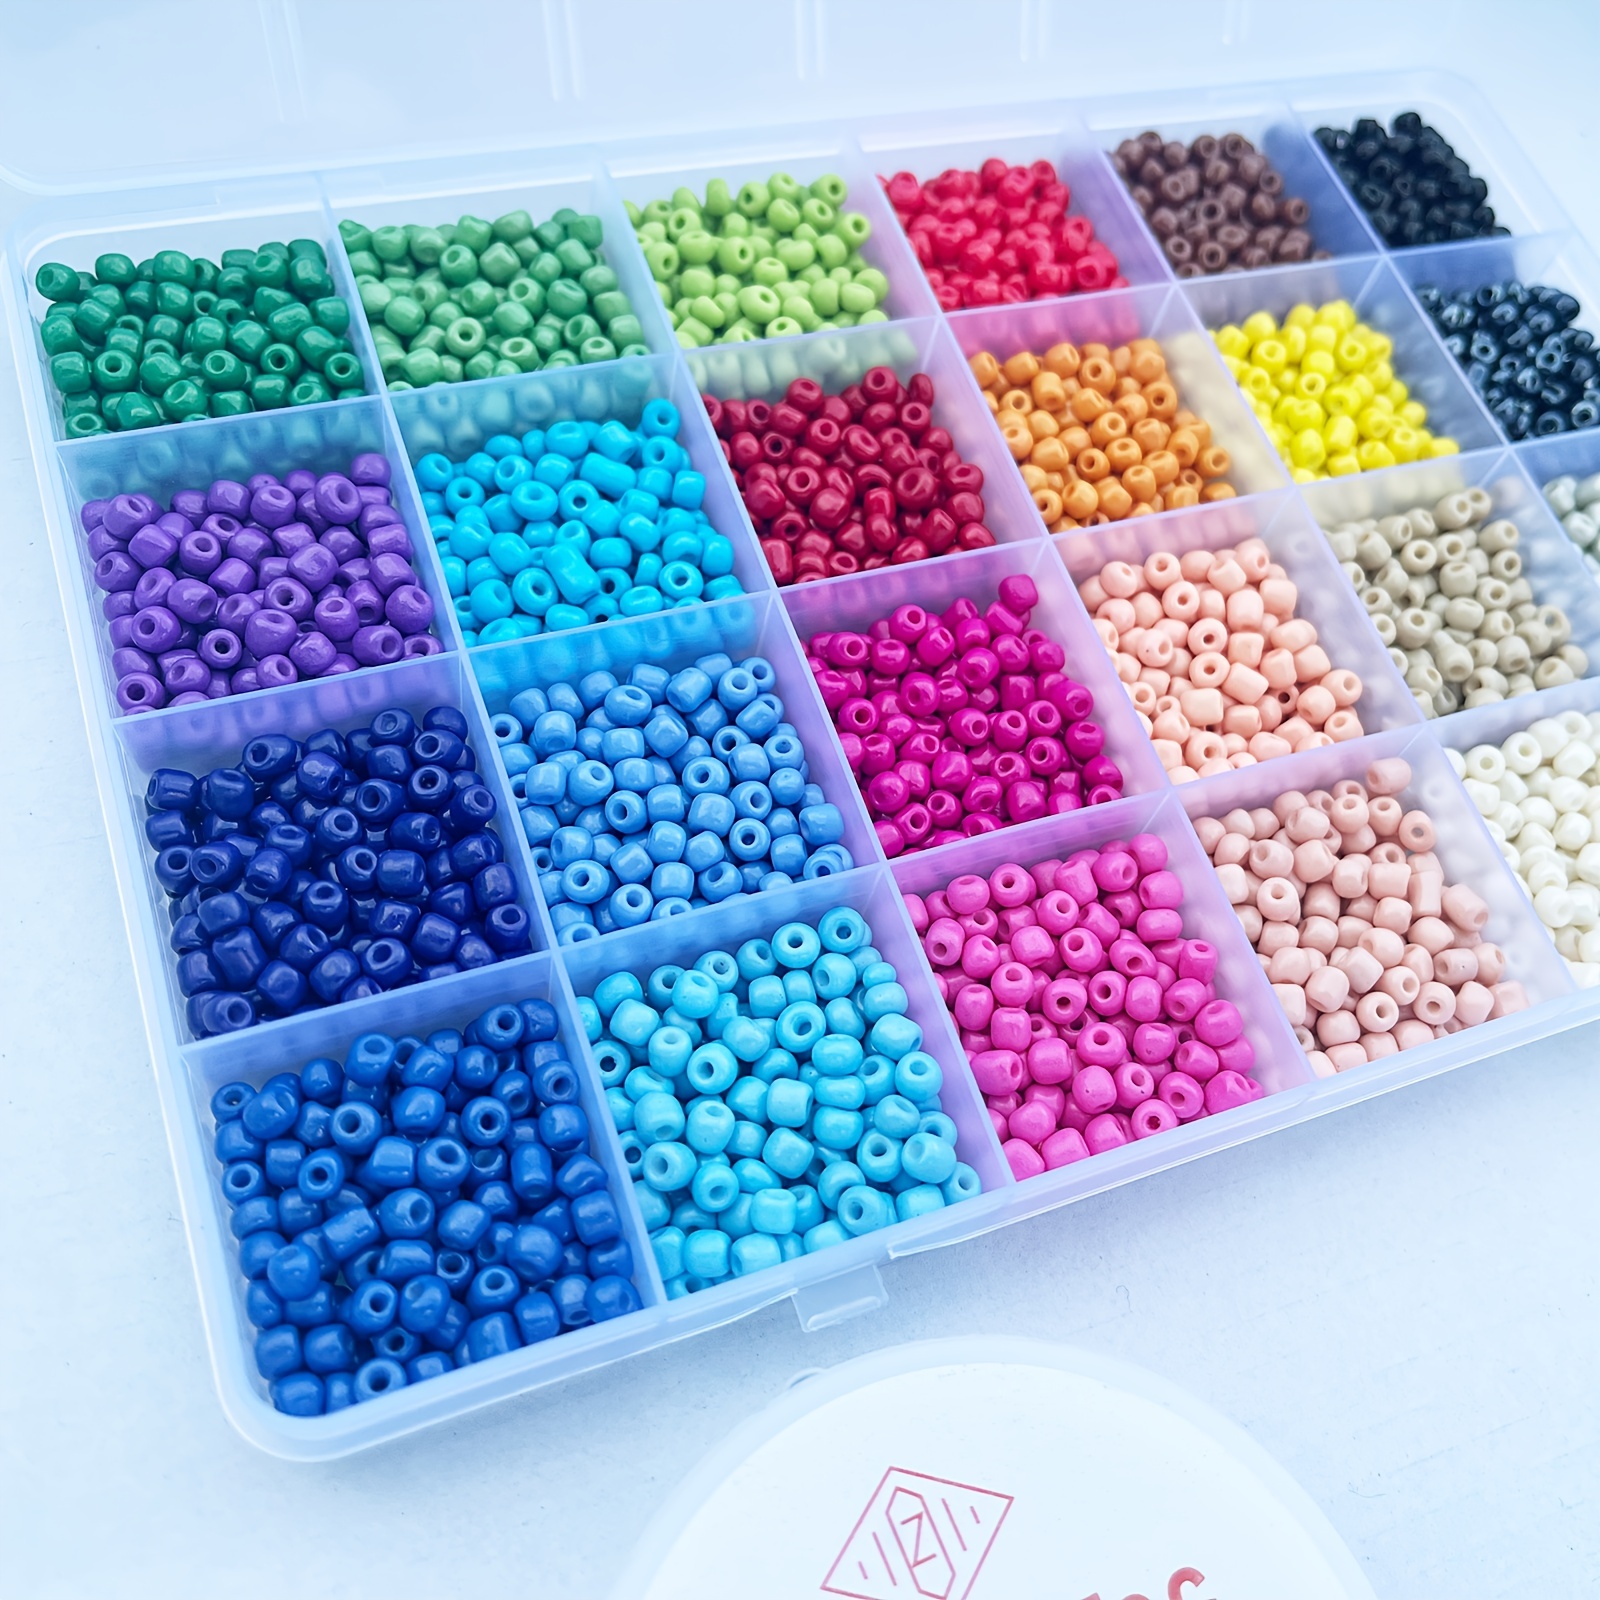 2500Pcs Colors Crafts Glass Seed Beads, Tiny Beads with Organizer Box for  Jewelry Making, Bead Embroidery, Crafts